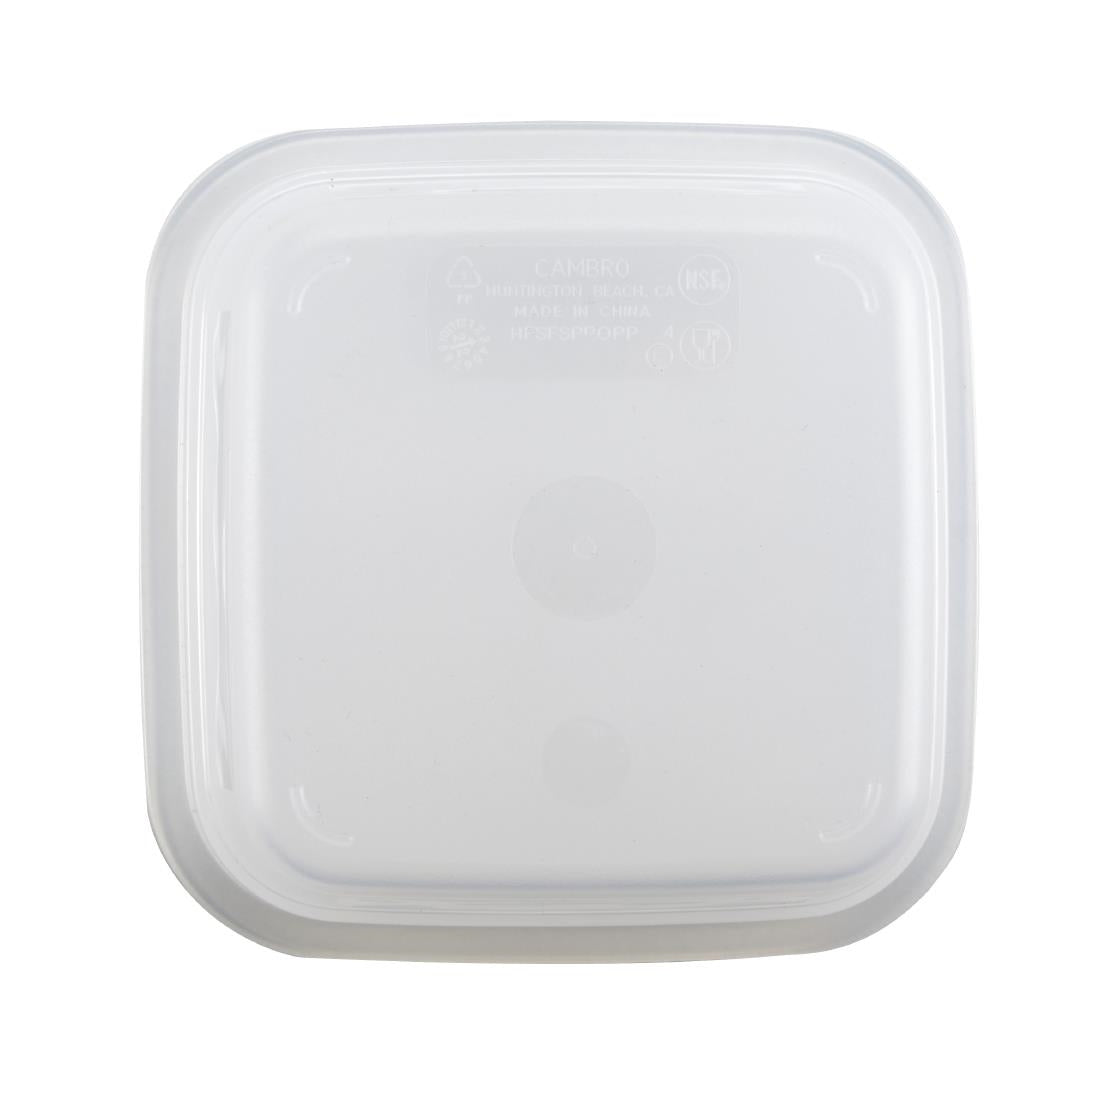 CU134 Cambro FreshPro Food Storage Container 473ml JD Catering Equipment Solutions Ltd